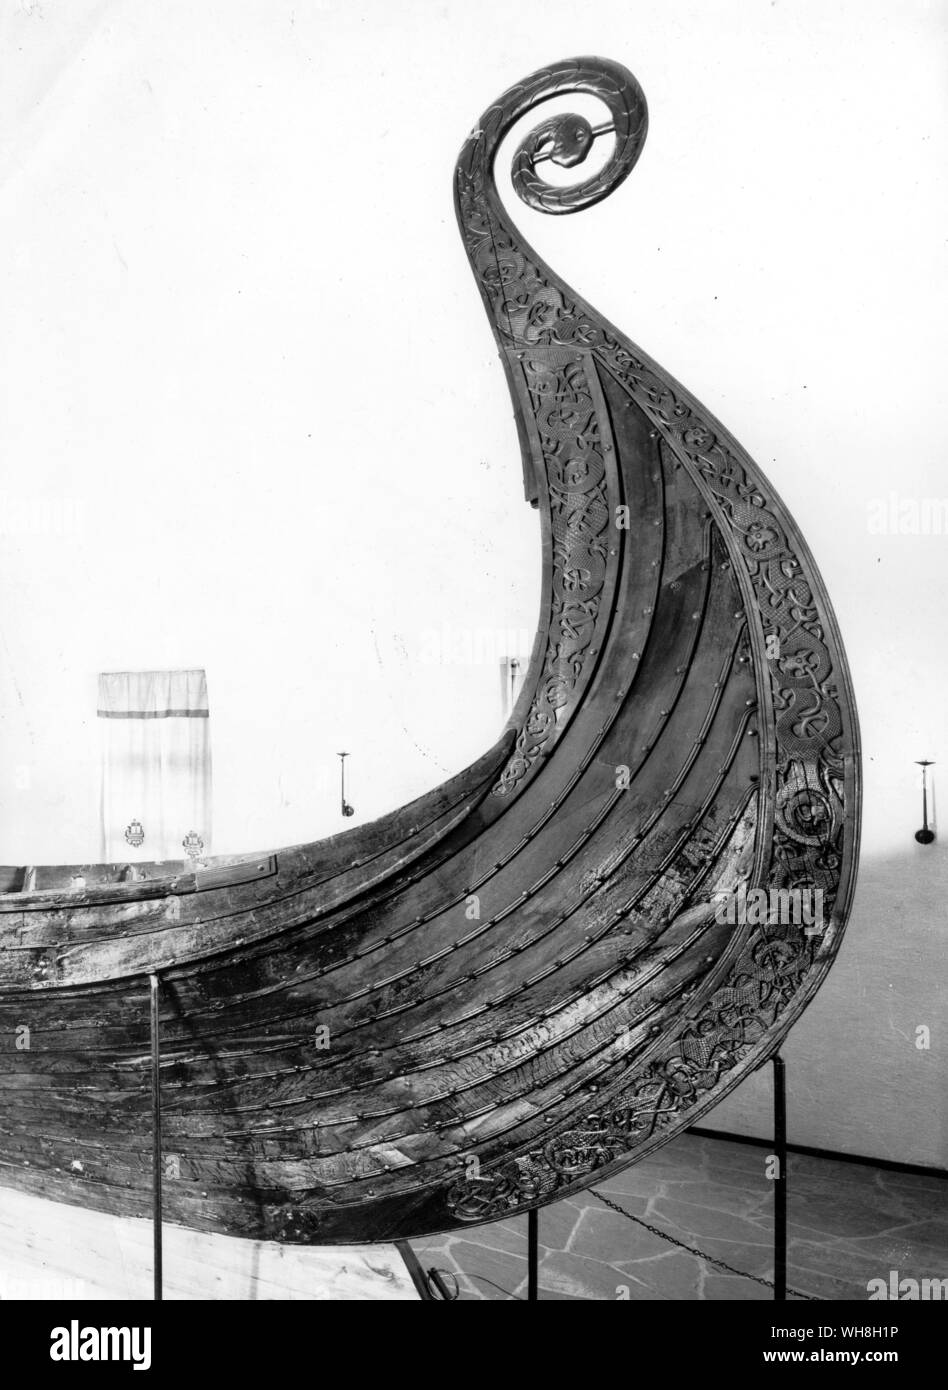 The prow of the Oseberg ship. The Opening of the World by David Divine, page 56. Stock Photo